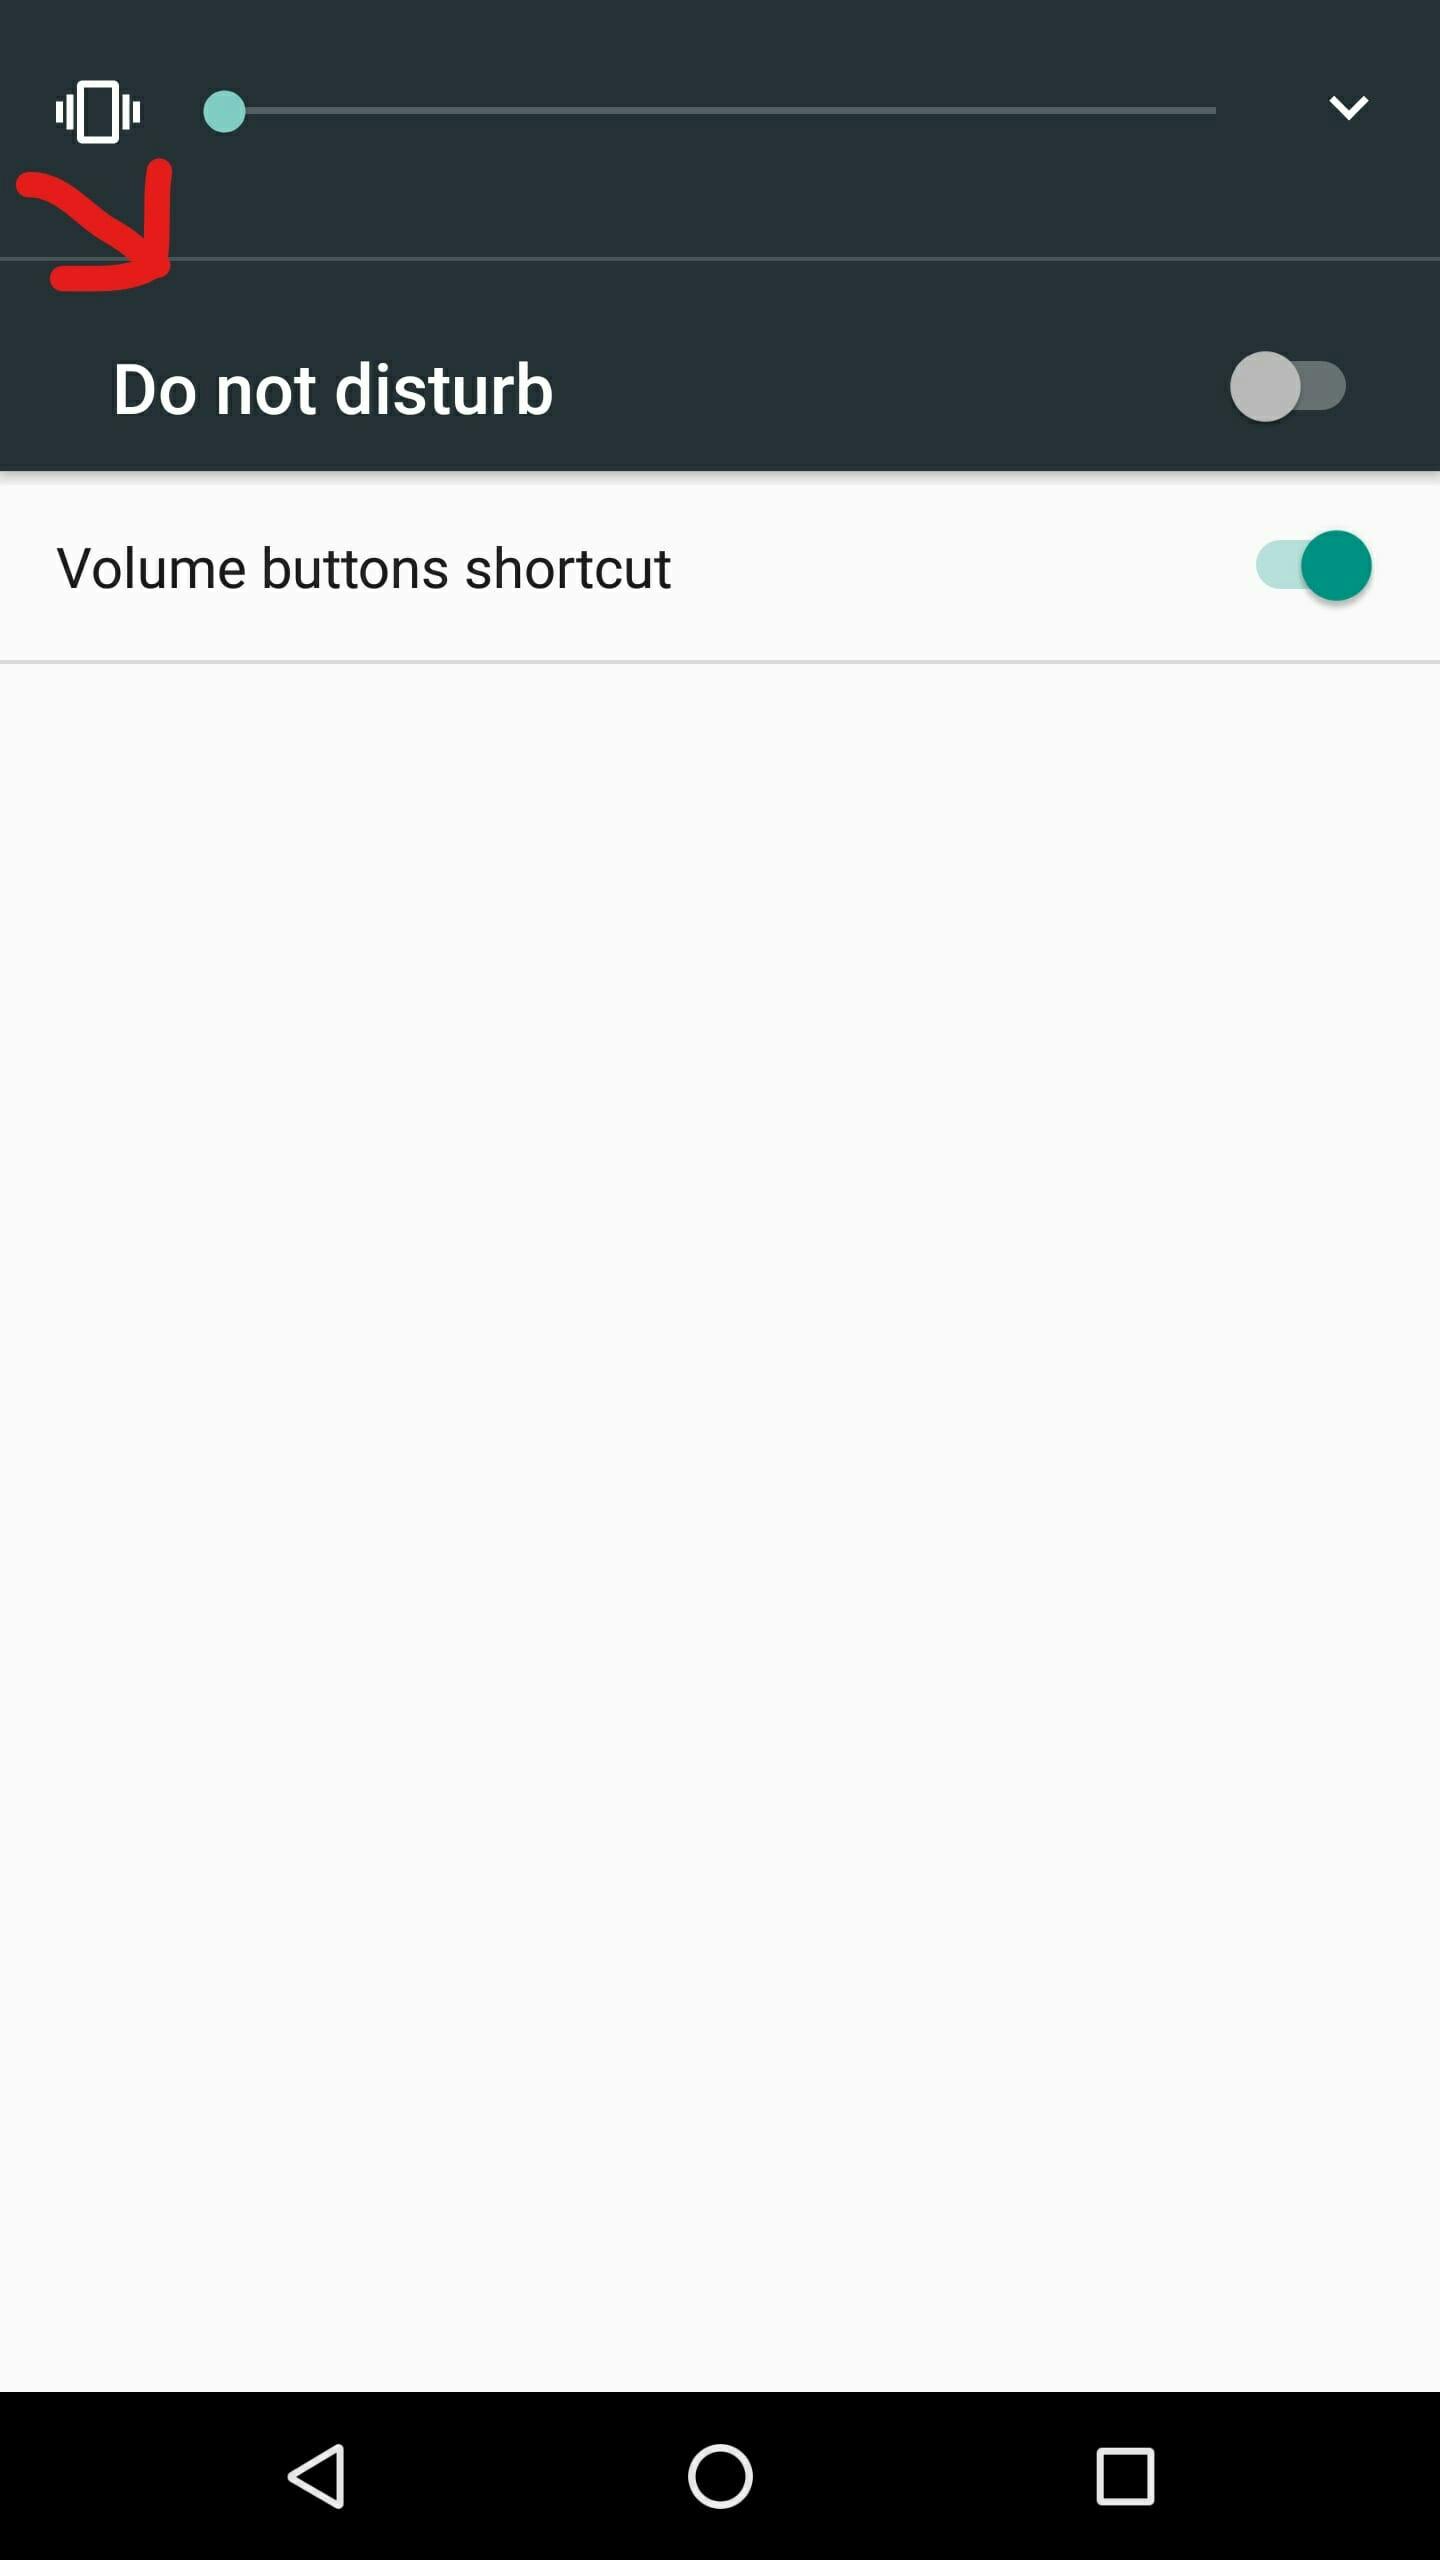 android : do not disturb volume